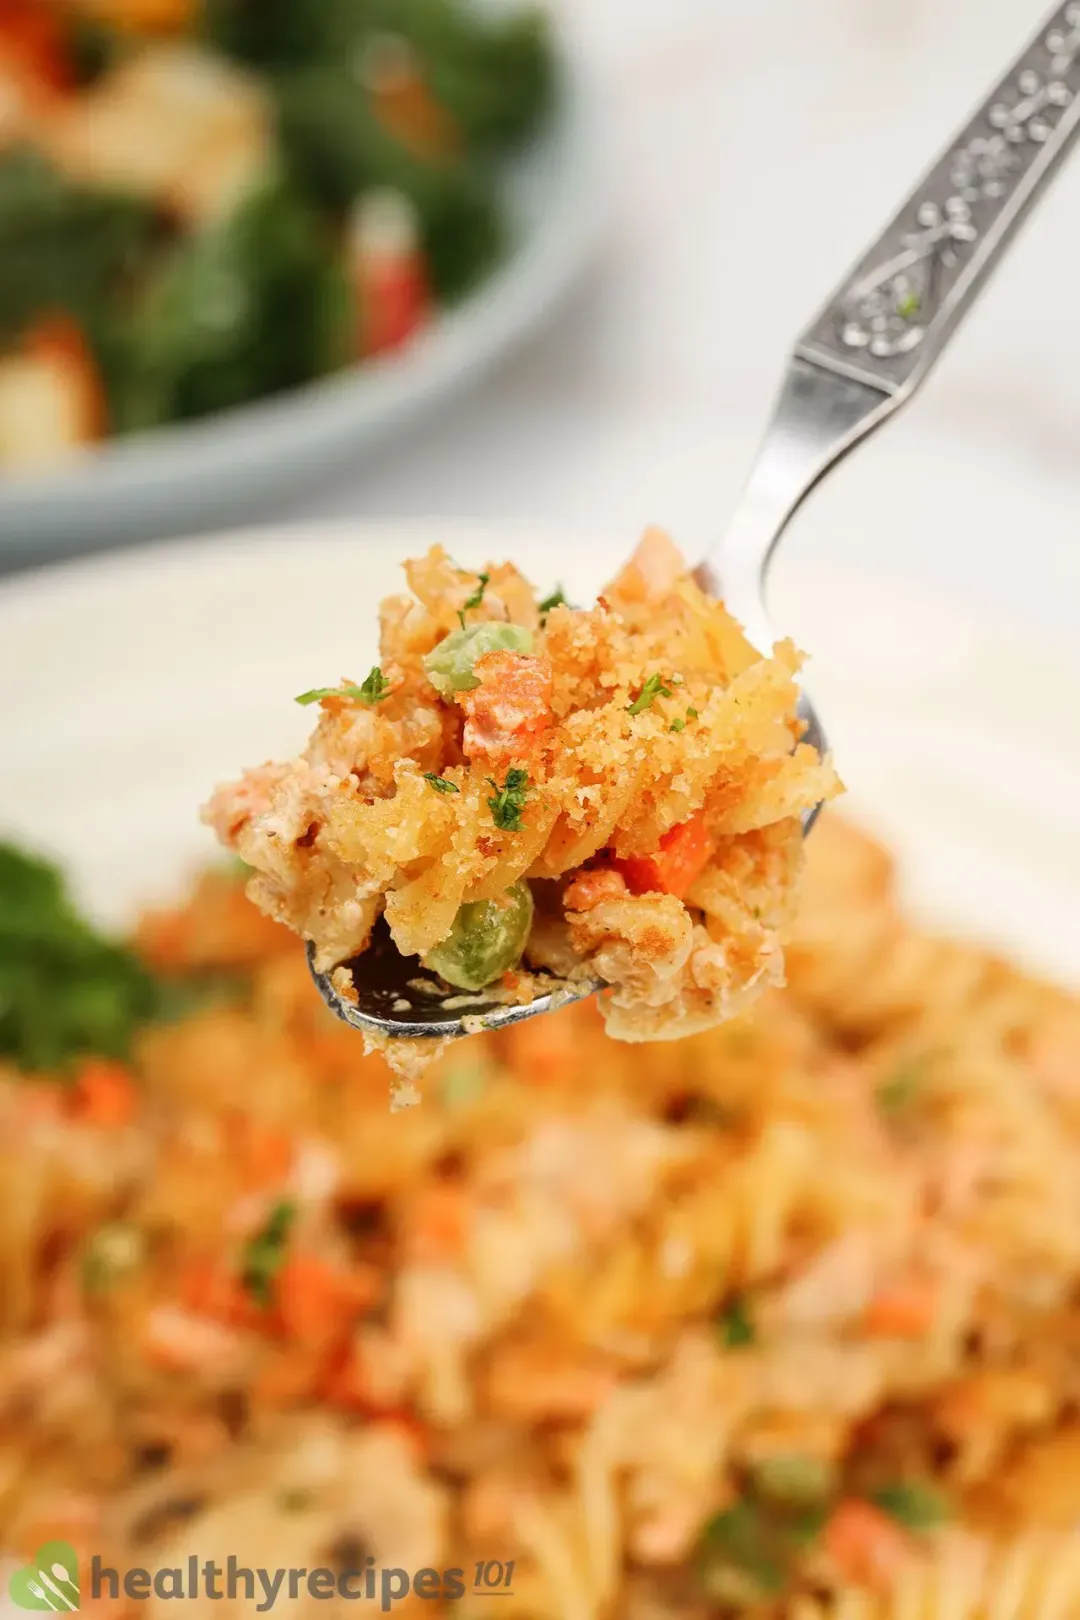 How to Store and Reheat Salmon Casserole